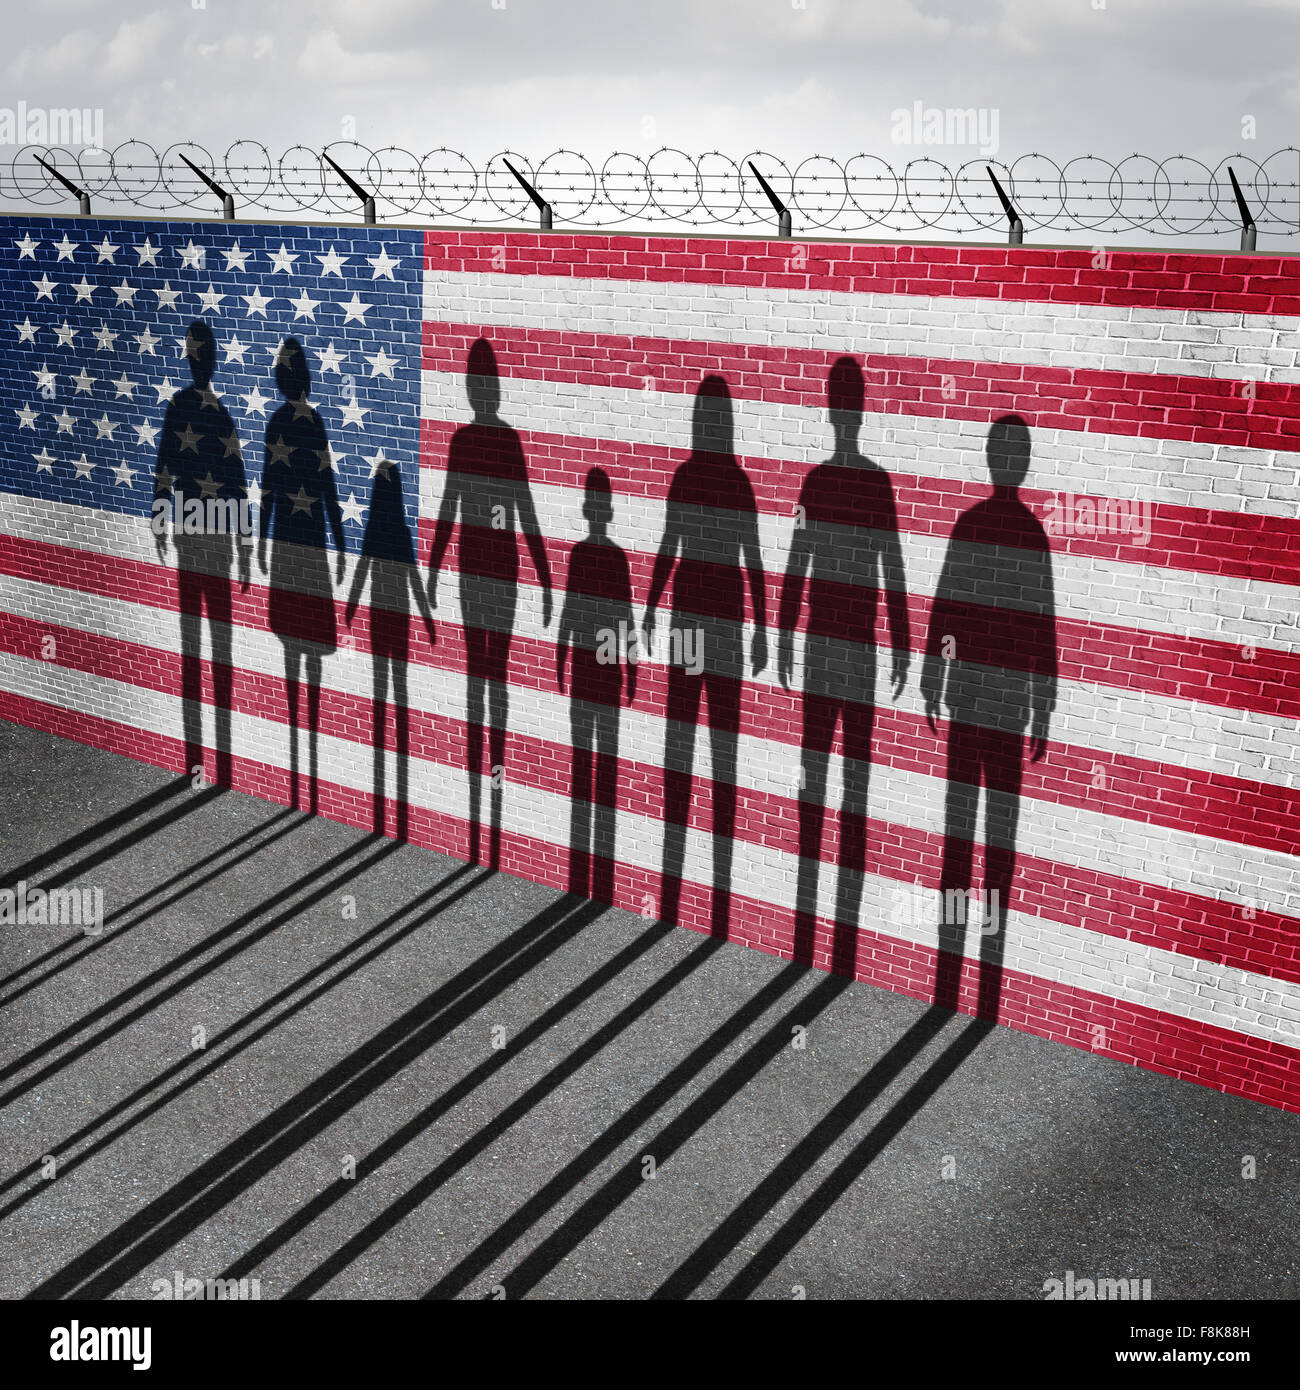 American Immigration And United States Refugee Crisis Concept As People On A Border Wall With A